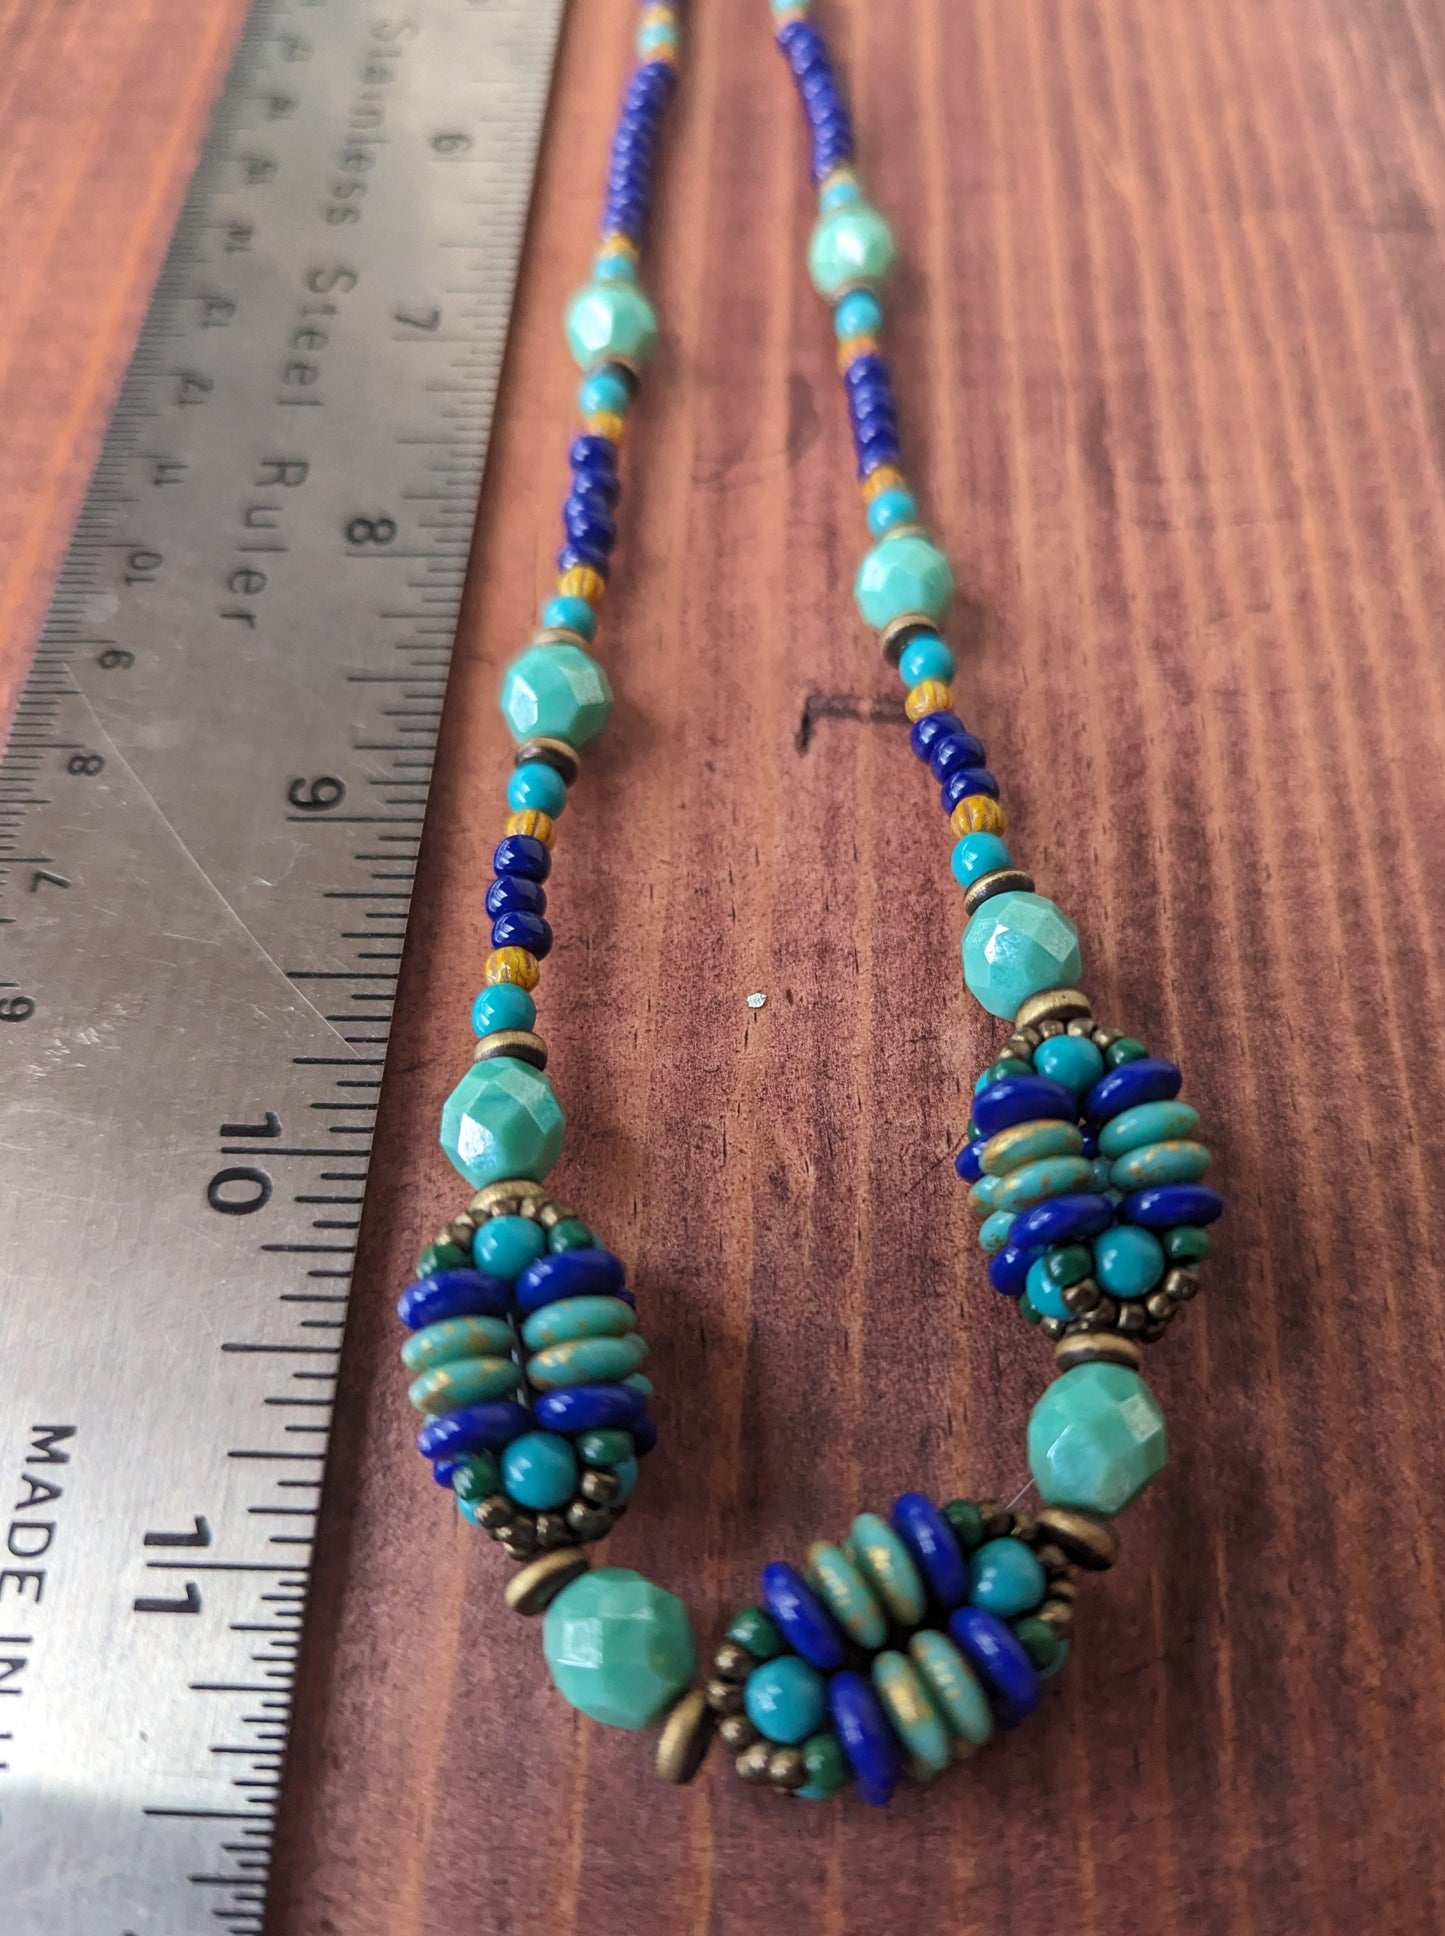 A royal blue and turquoise necklace laying next to a metal ruler on a reddish wood board. The necklace has three clusters of beaded spheres.  The  image is photographed as an angle that makes the bottom of the necklace and ruler appear larger. 